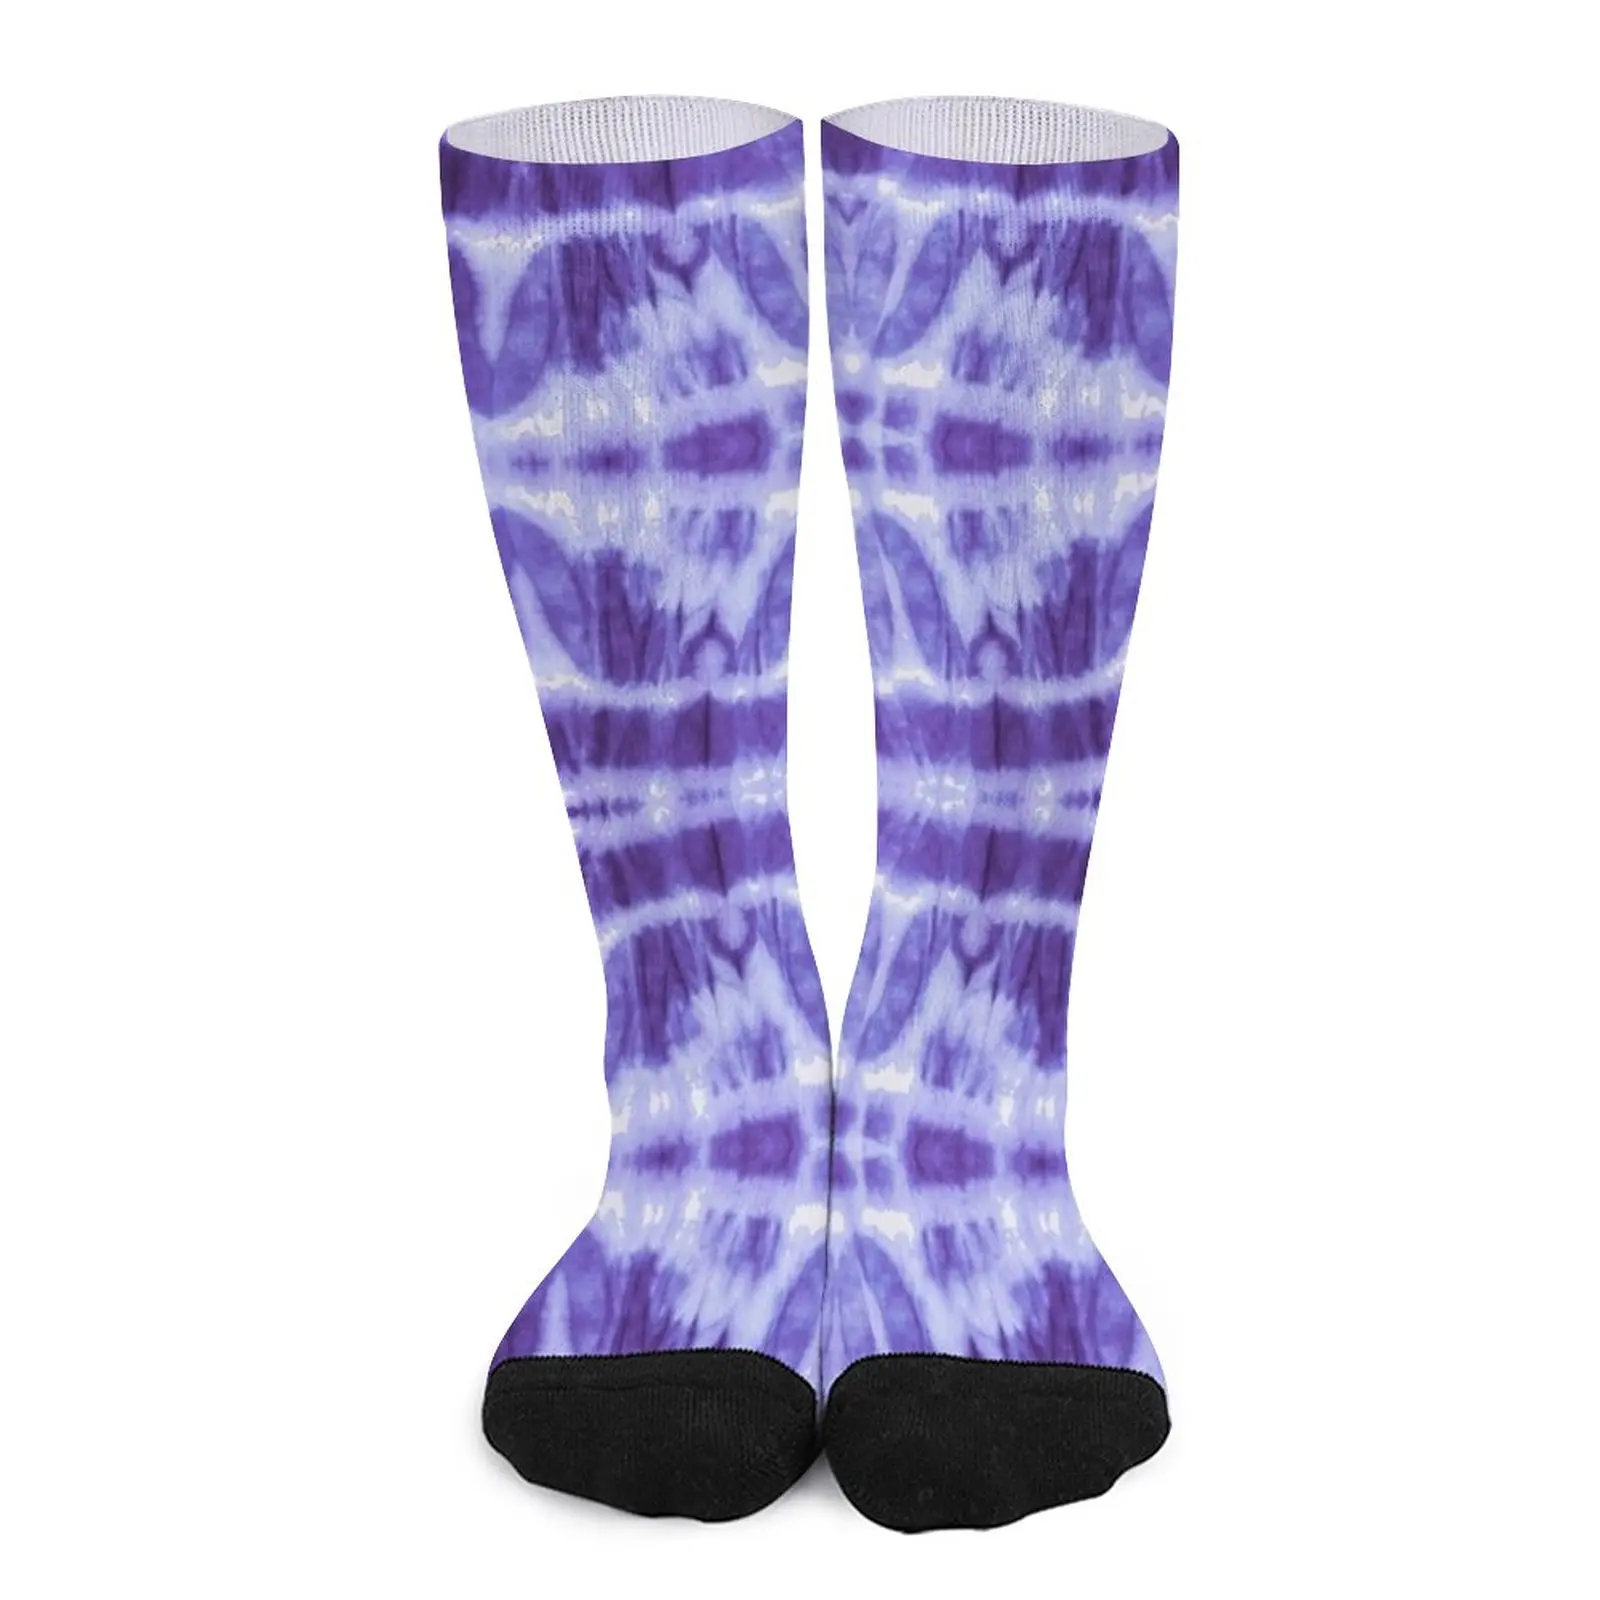 Tie Dye Violet Twos Socks Male sock golf Stockings compression socks ladies autumn winter new male thick warm patchwork cardigan sweater ladies loose casual all match knitting top men jacket homme outwear